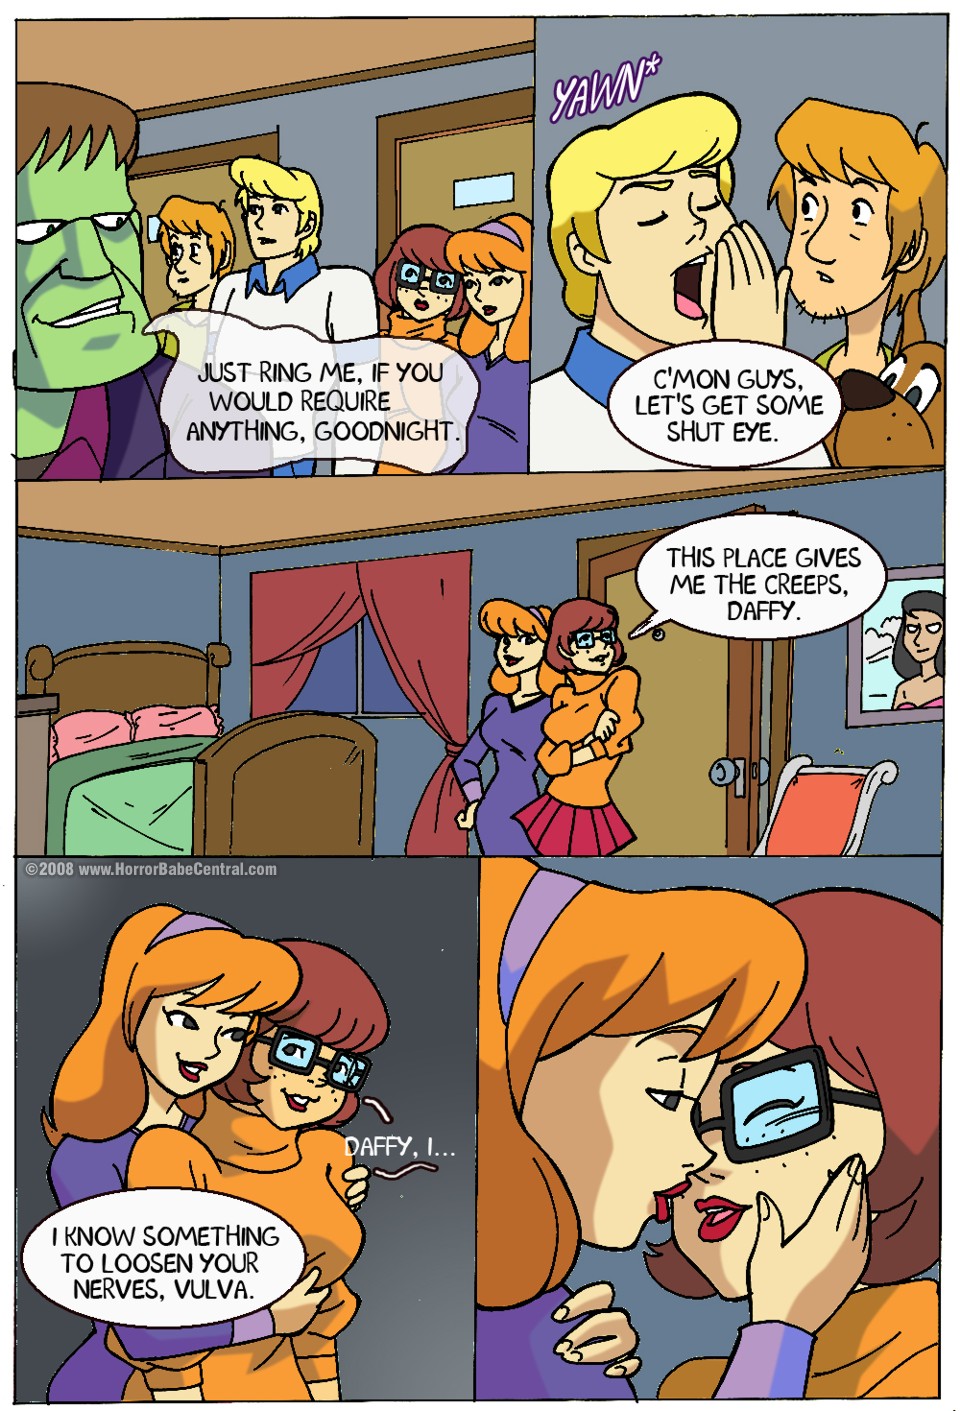 Scooby Doo Mystery Incorporated Porn Caption - scooby doo porn comics all heroes in action 1 - XXXPicz